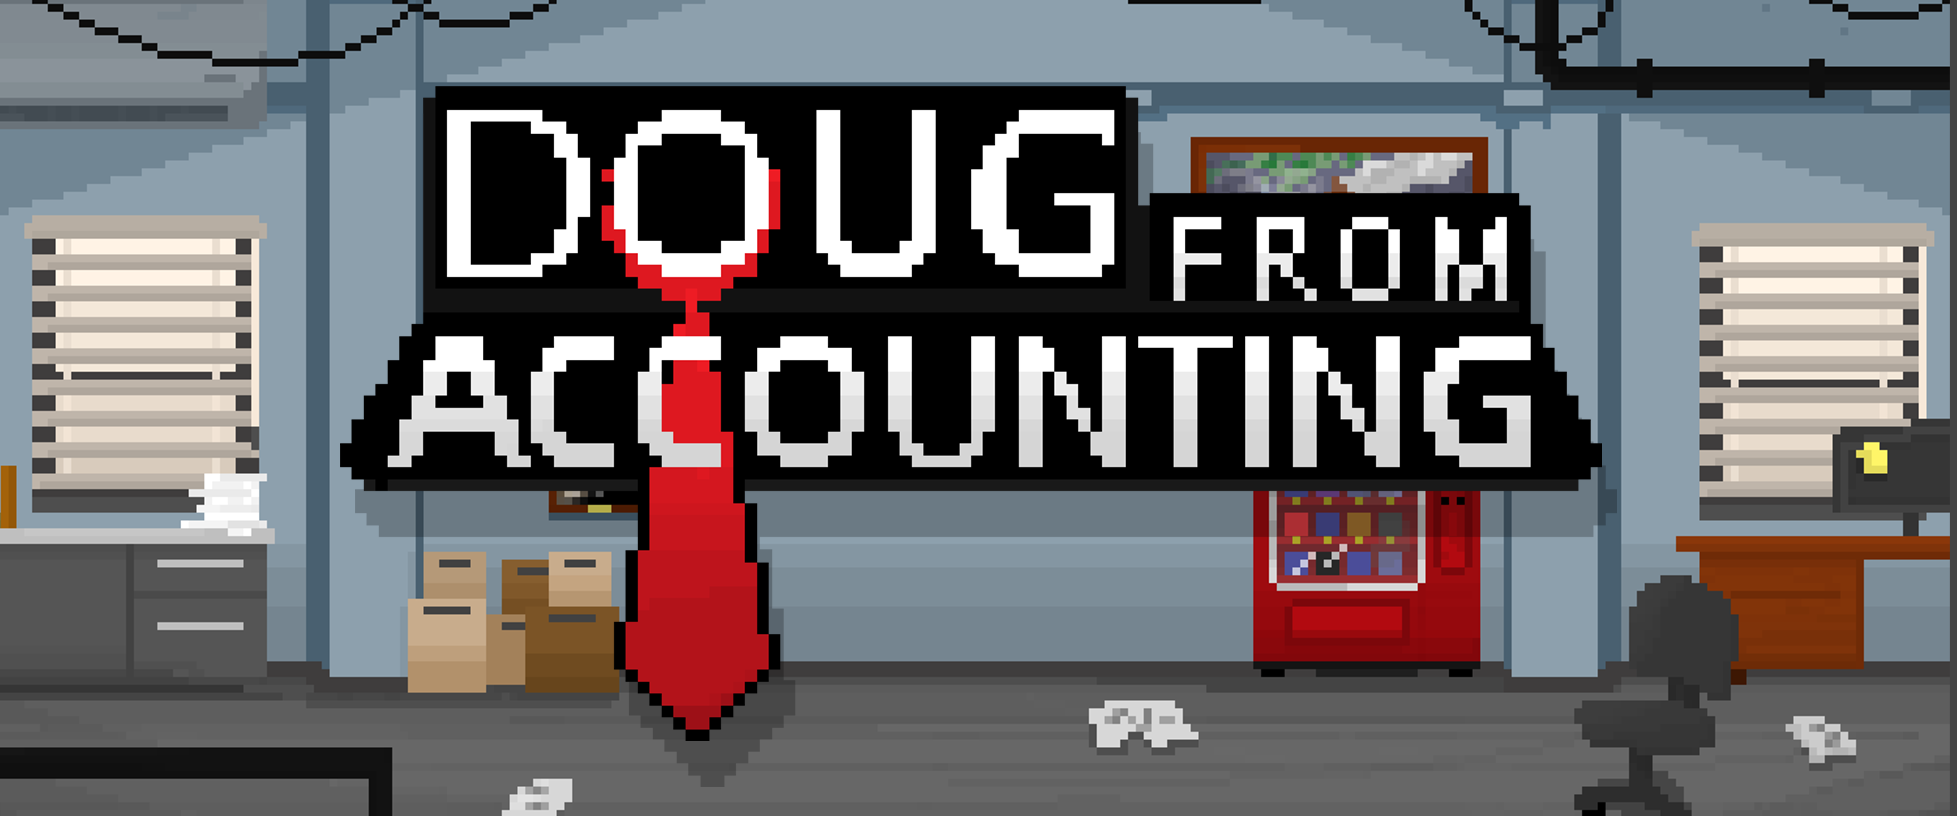 Doug From Accounting